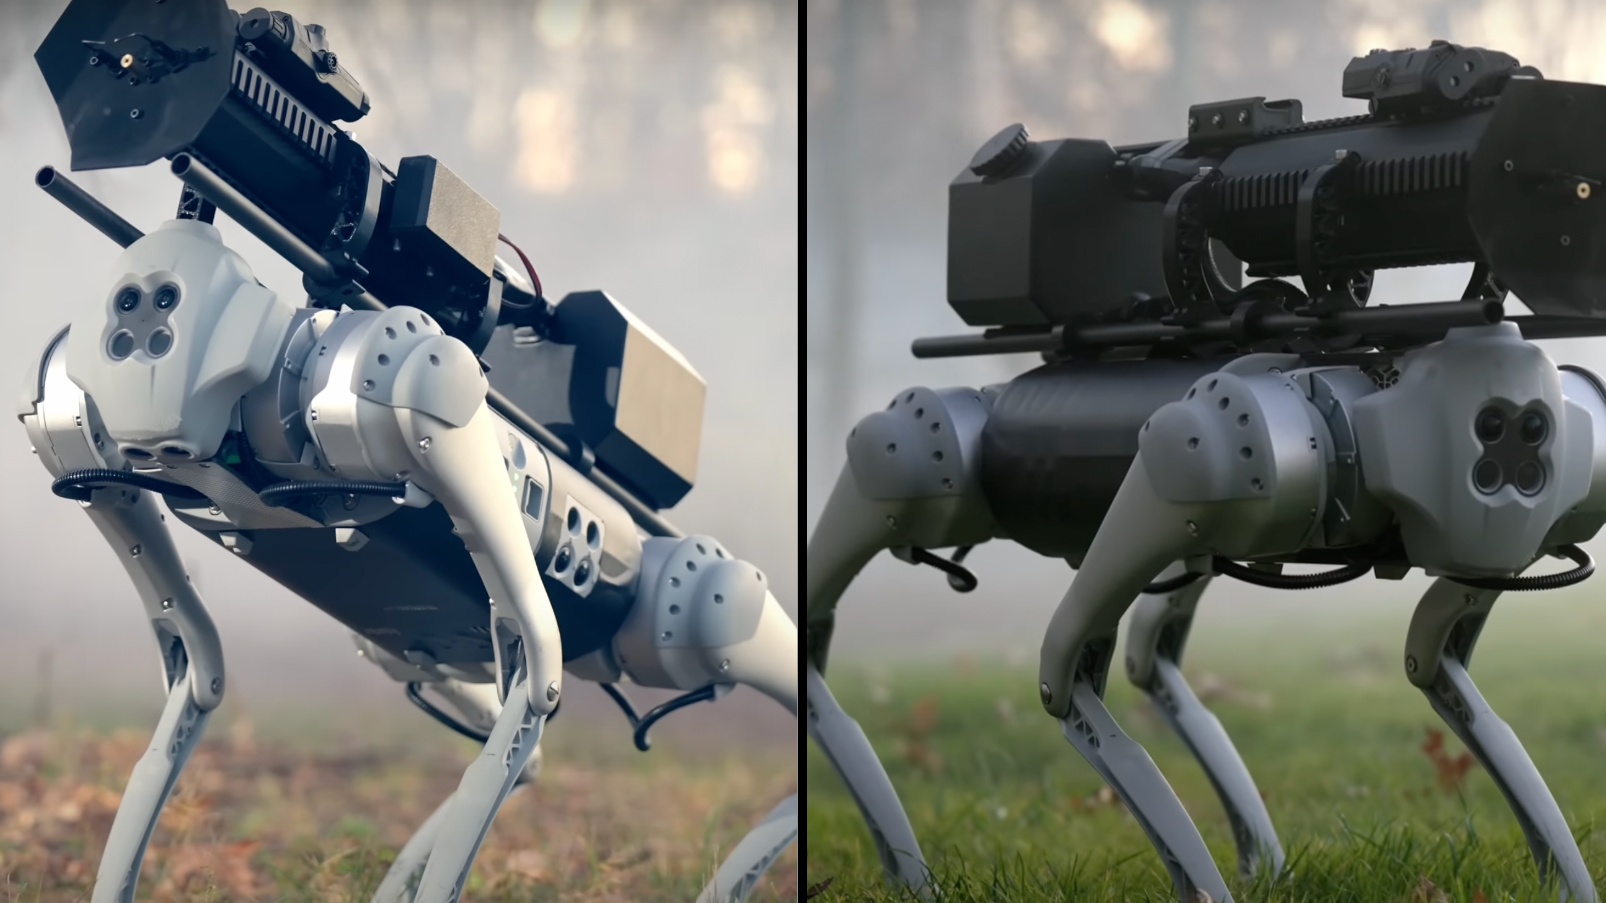 Finally, a Robot Dog That Doesn't Look Like It's Going to Kill Us All